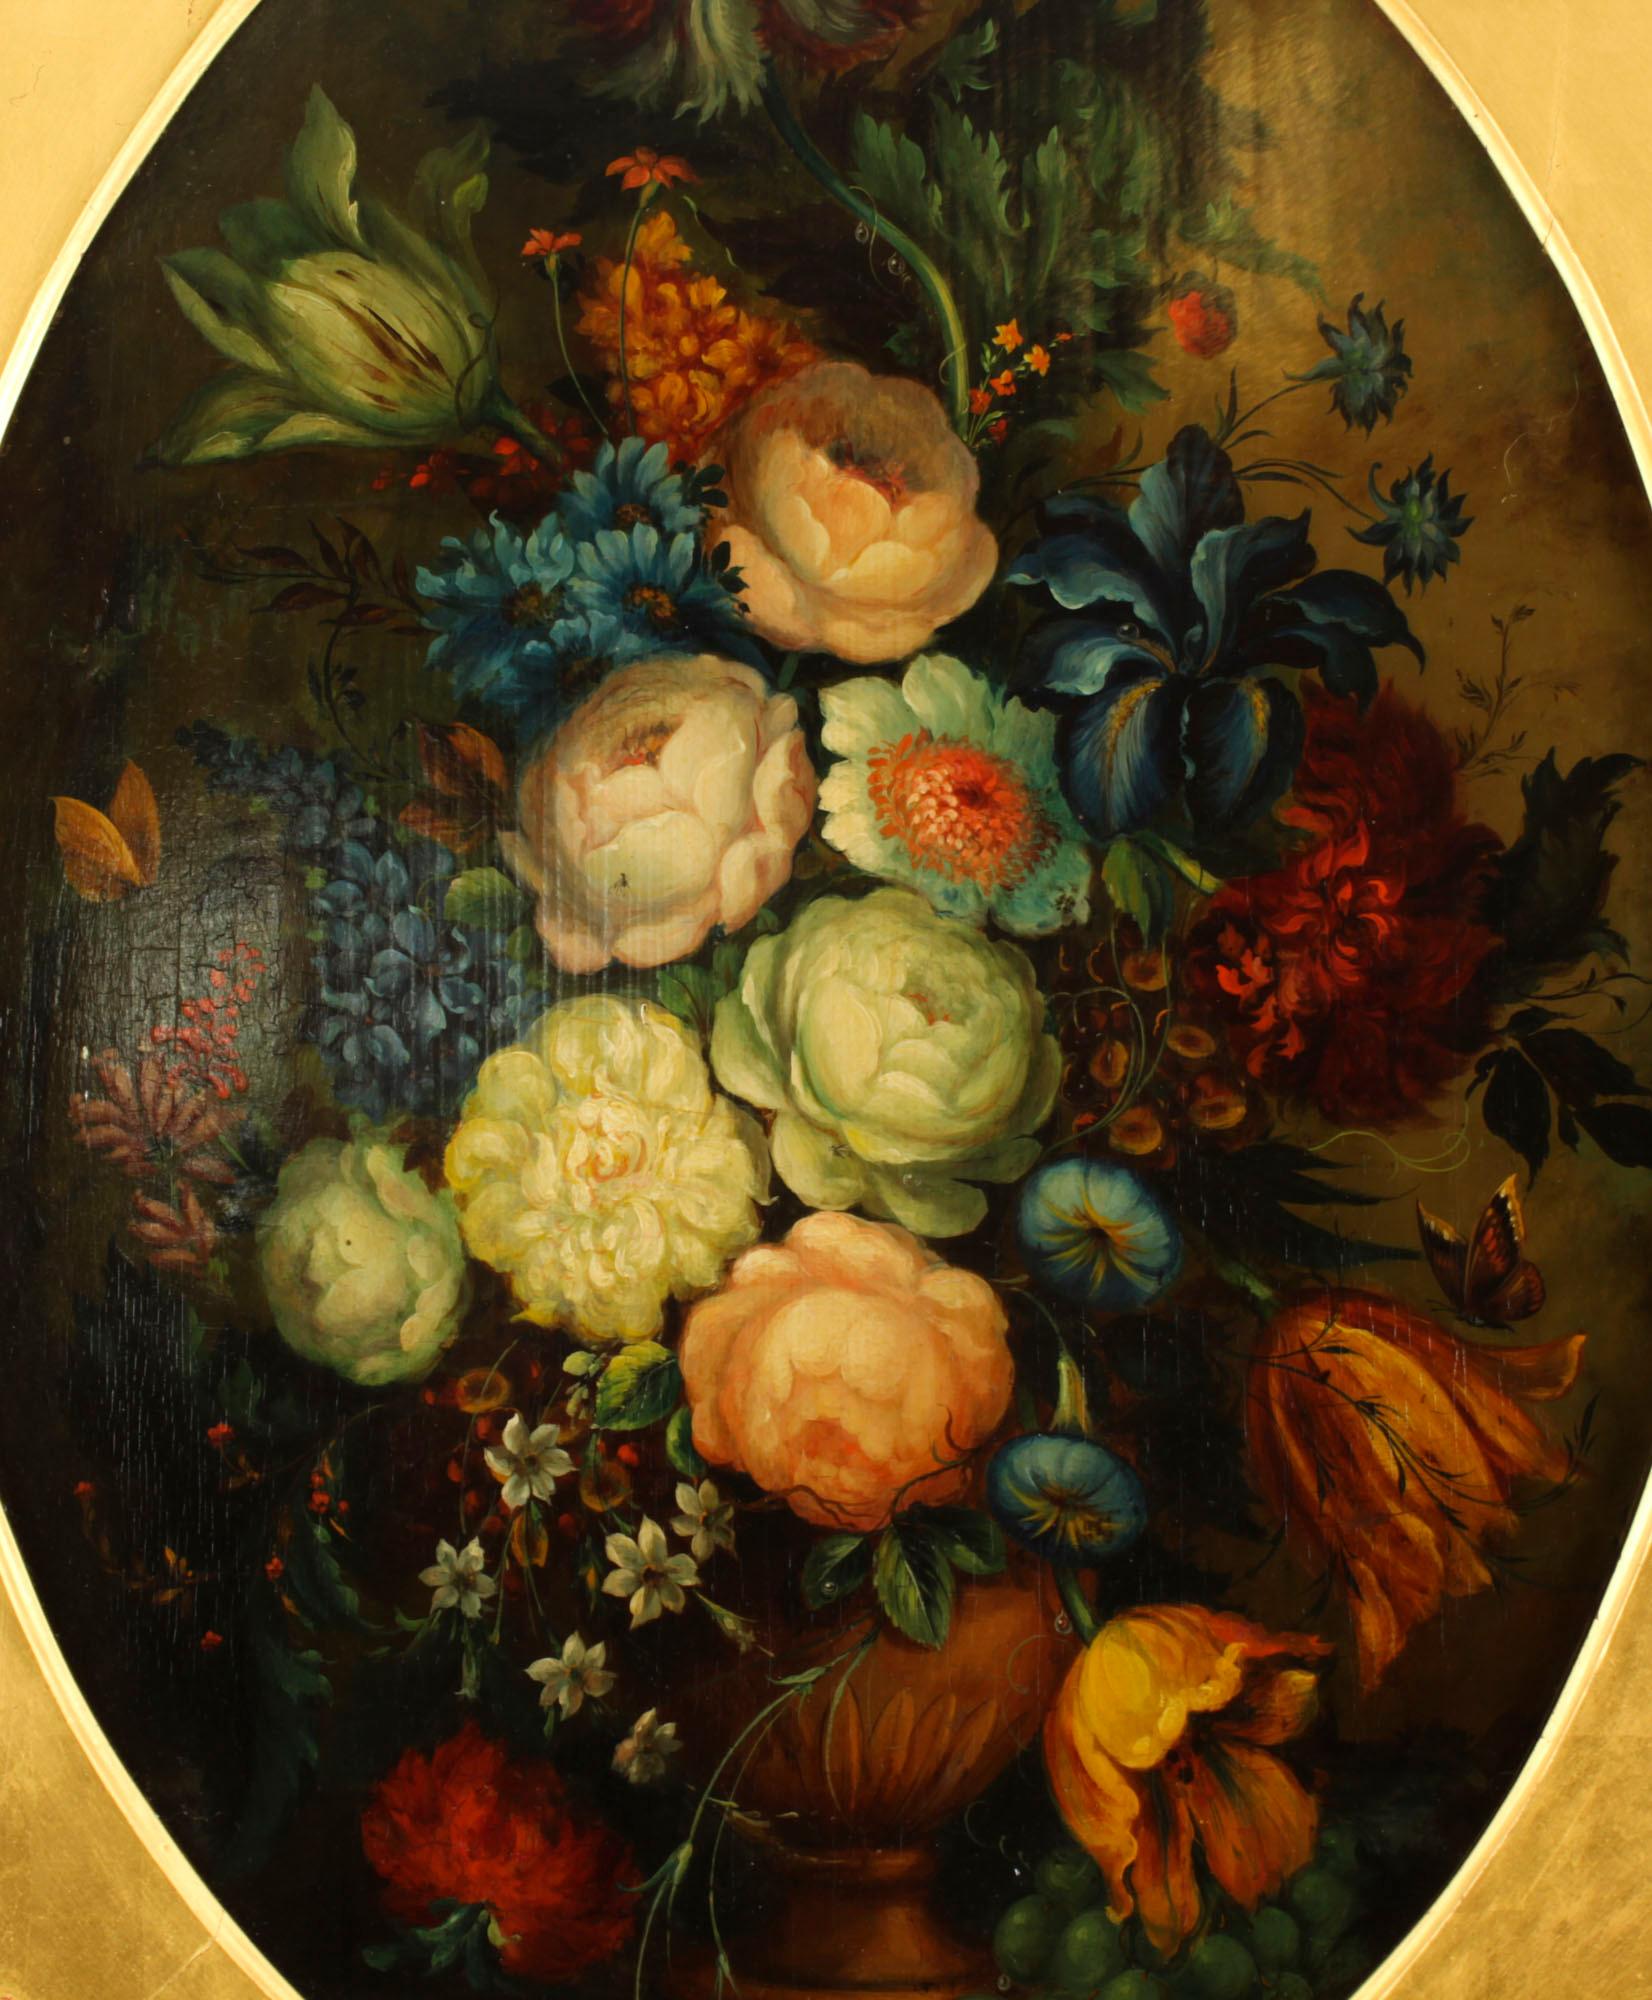 Antique English School Oil on Panel Floral Still Life Painting 19th Century In Good Condition For Sale In London, GB